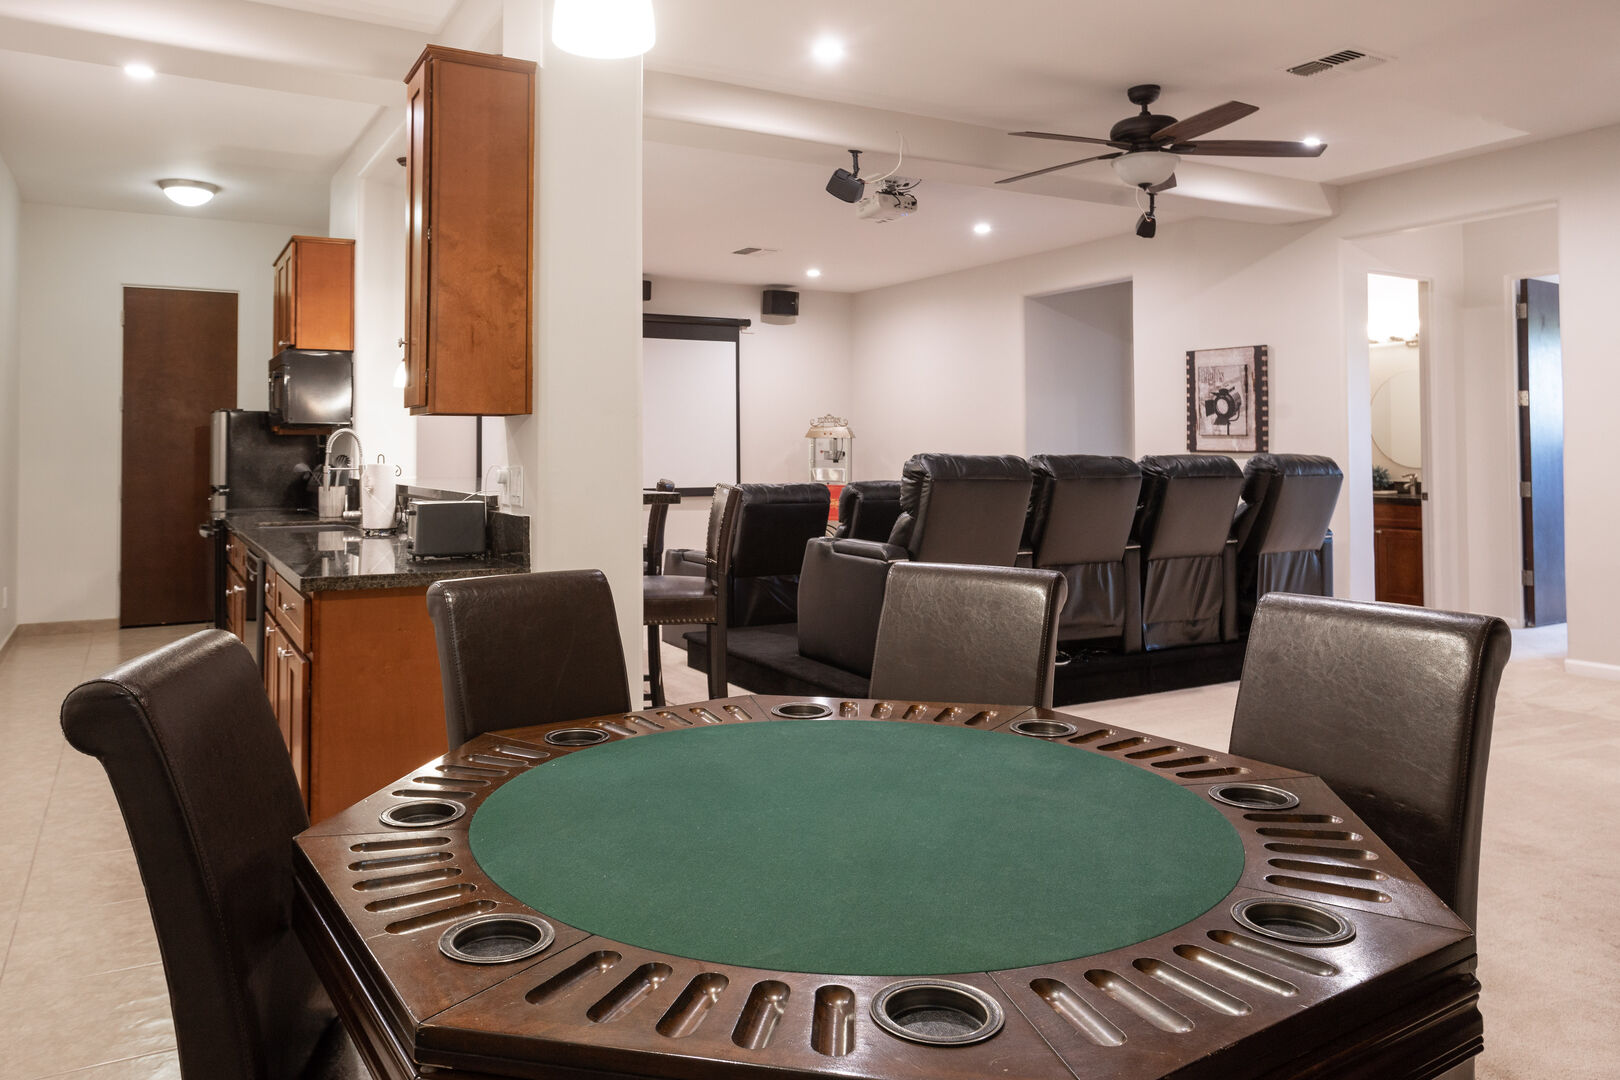 Poker Table in Theater Room